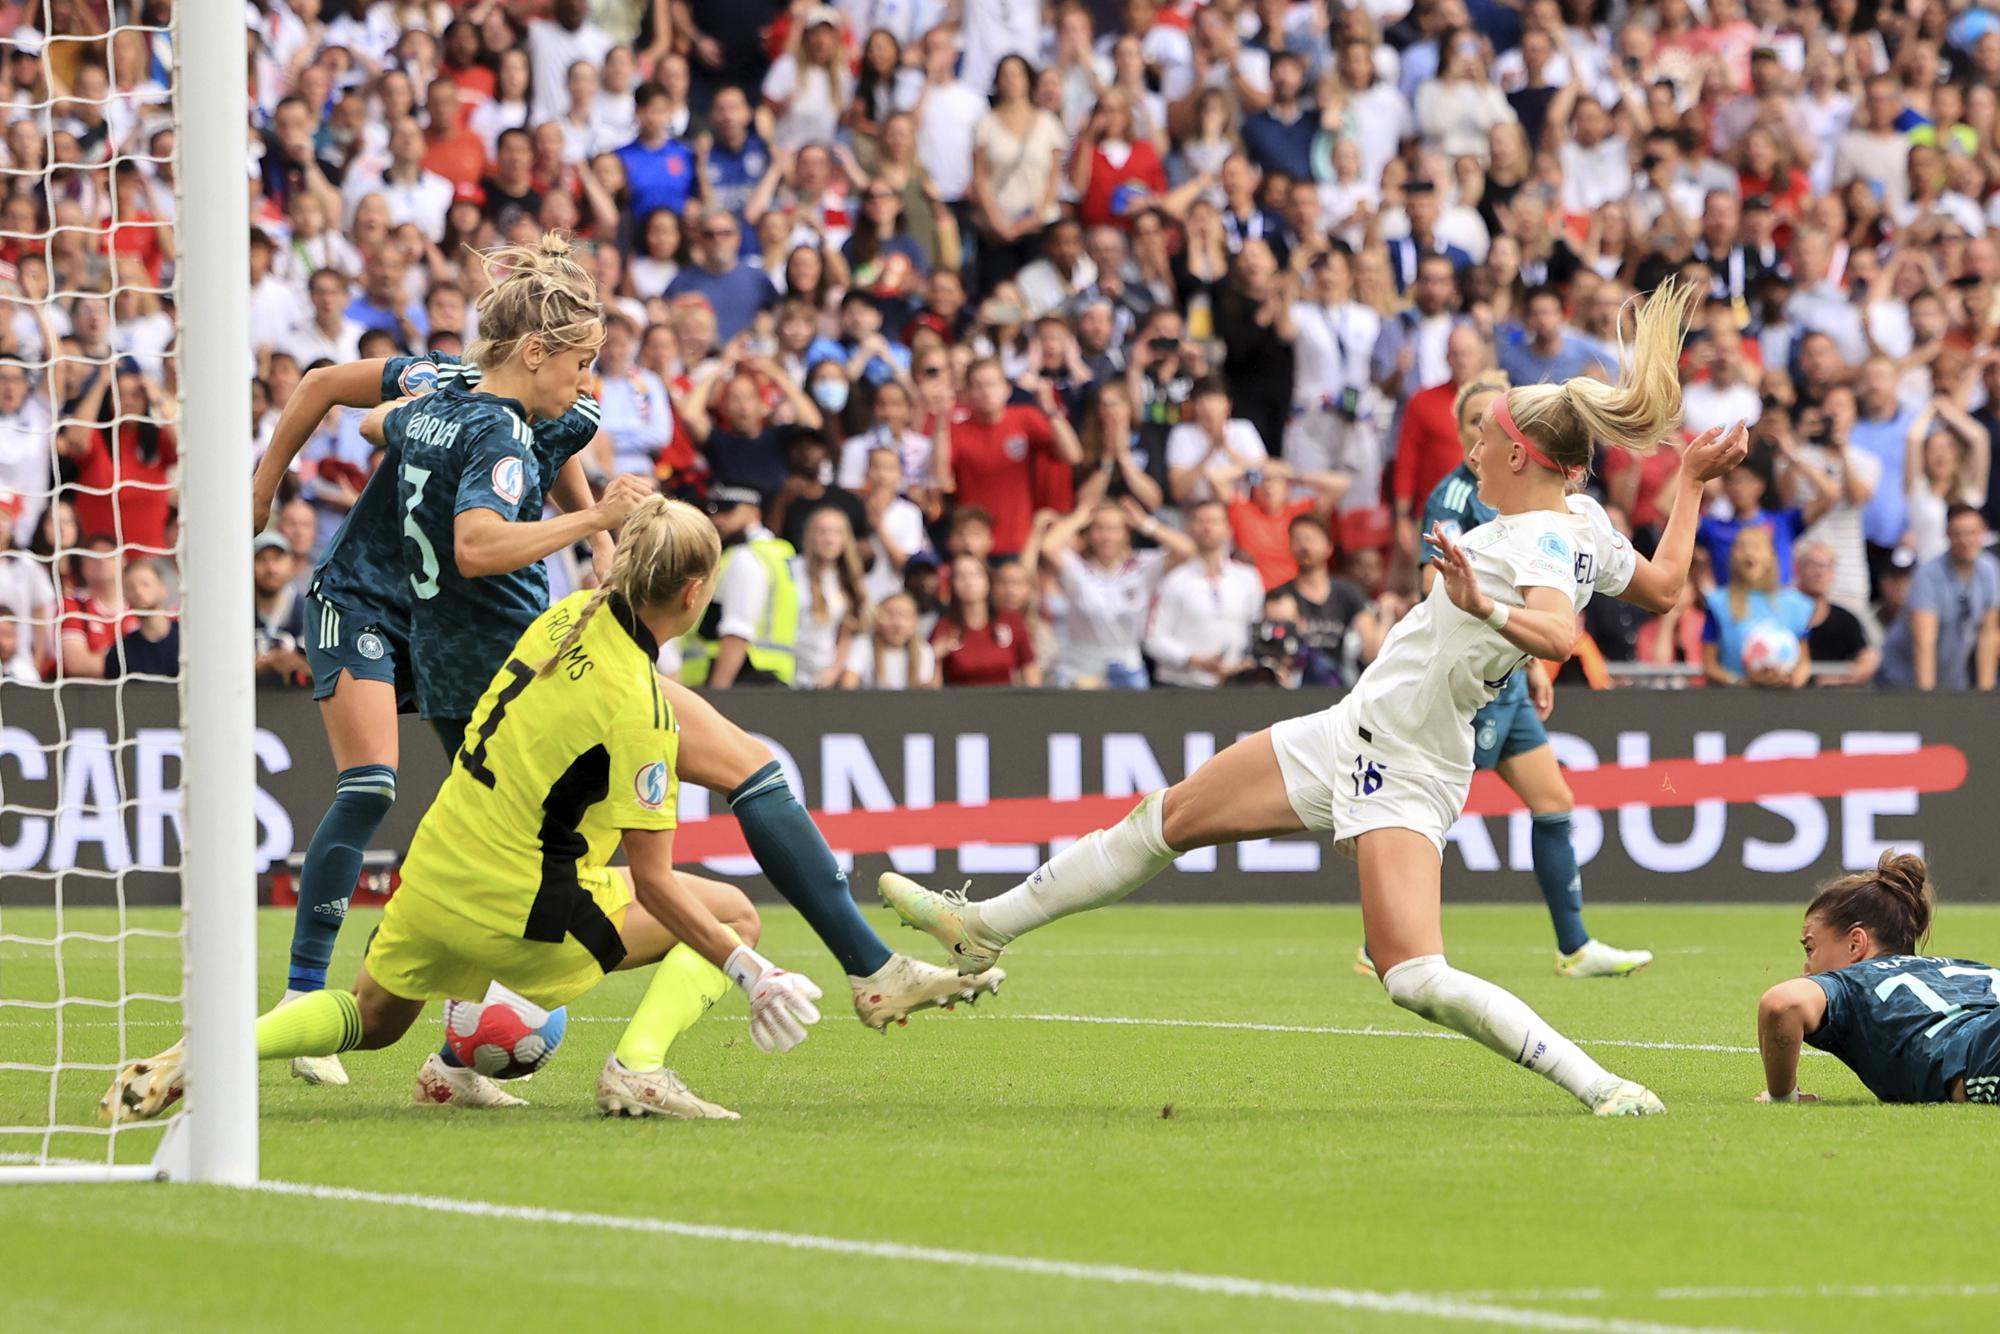 FILE - England's Chloe Kelly scores her side's second goal during the Women's Euro 2022 final soccer match between England and Germany at Wembley stadium in London, Sunday, July 31, 2022. (AP Photo/Leila Coker, File)